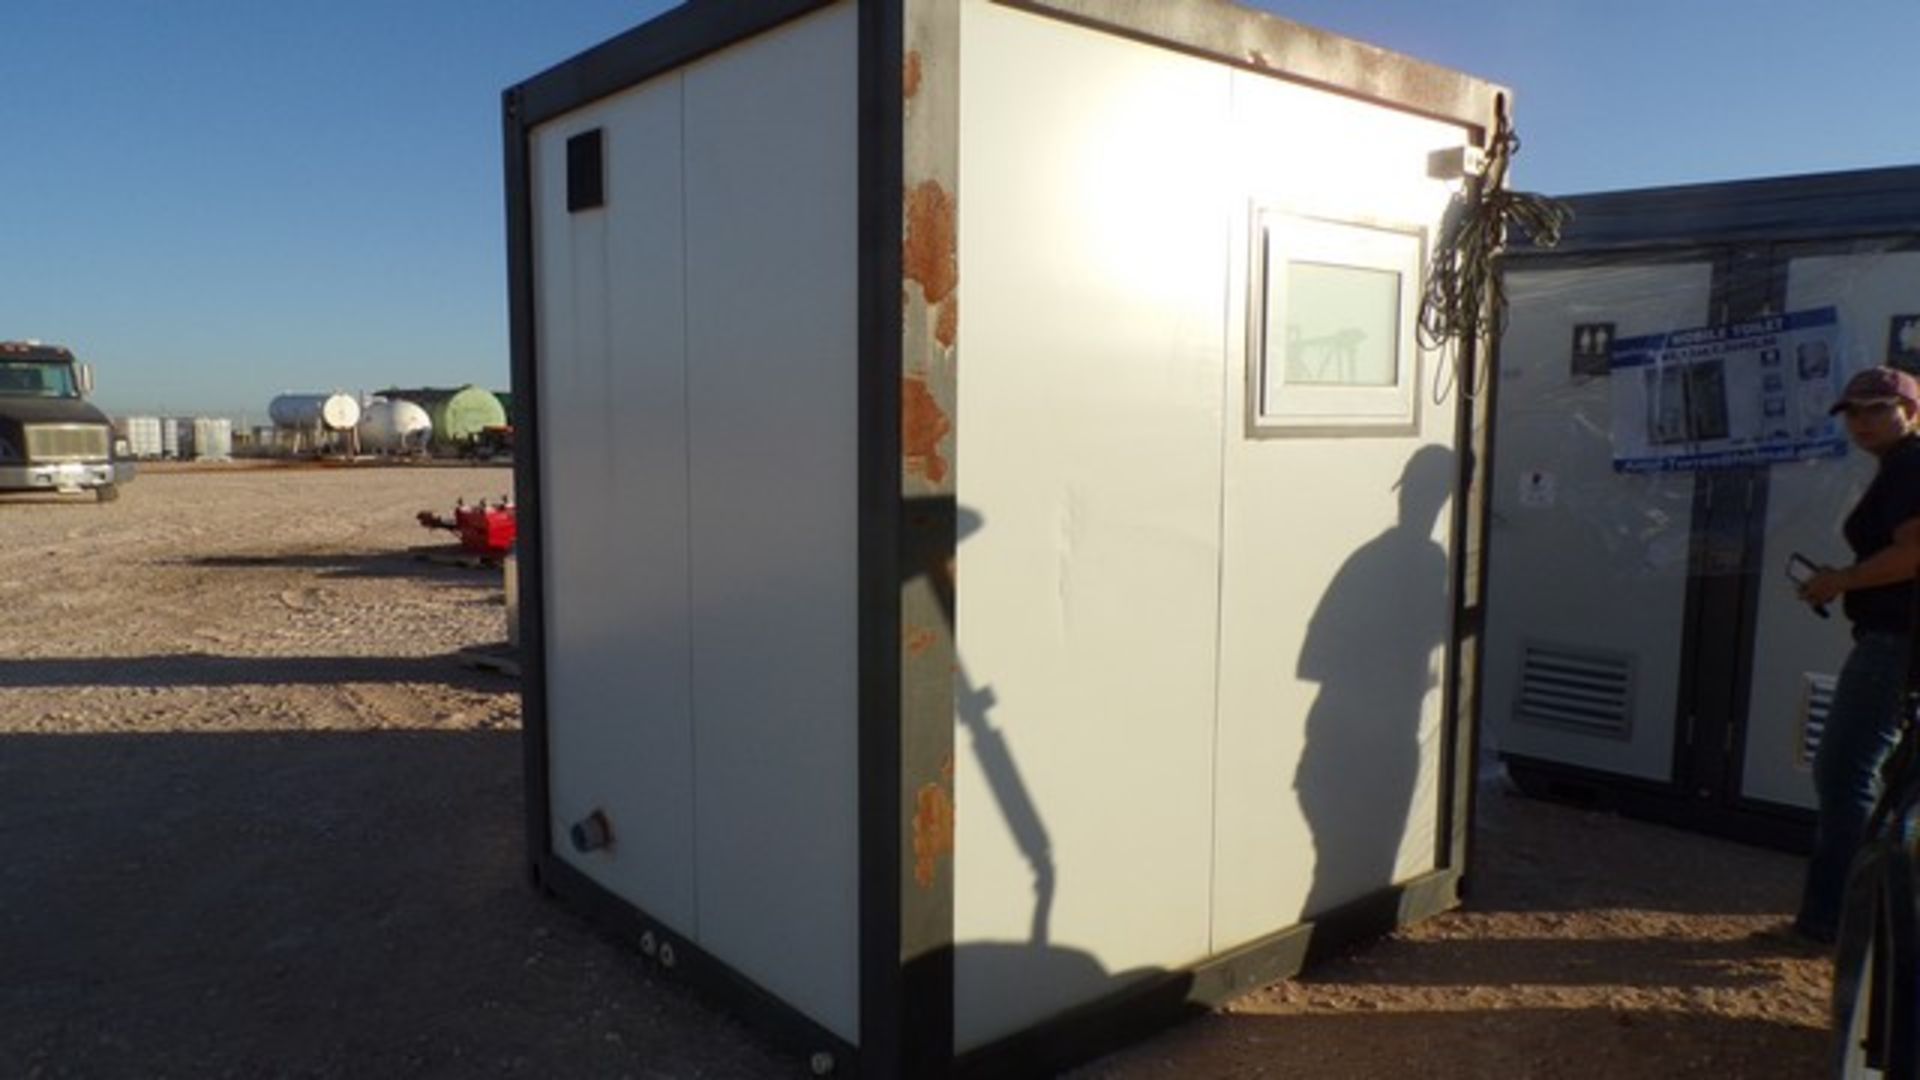 Located in YARD 1 - Midland, TX NEW 110V PORTABLE BATHROOM W/ SINK, TOLIET & SHOWER - Image 5 of 5